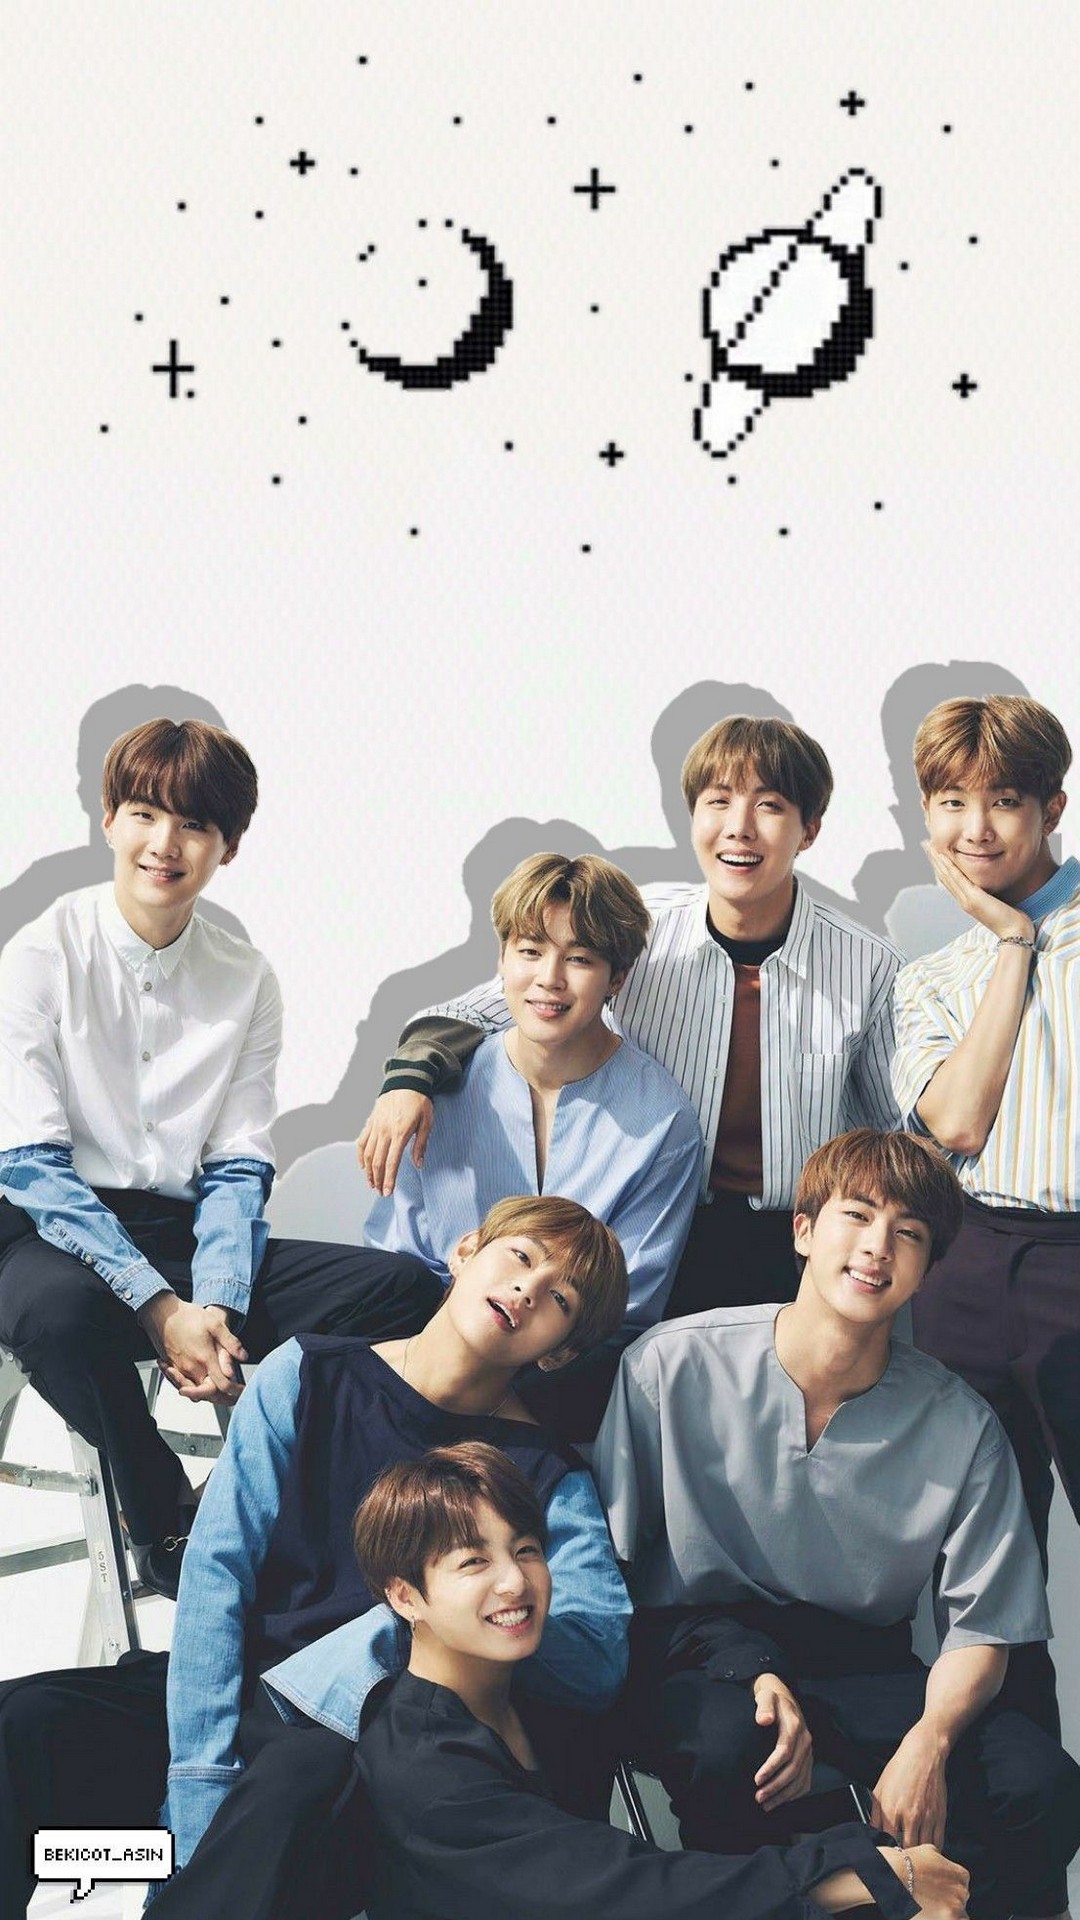 BTS Wallpaper Android   2020 Android Wallpapers